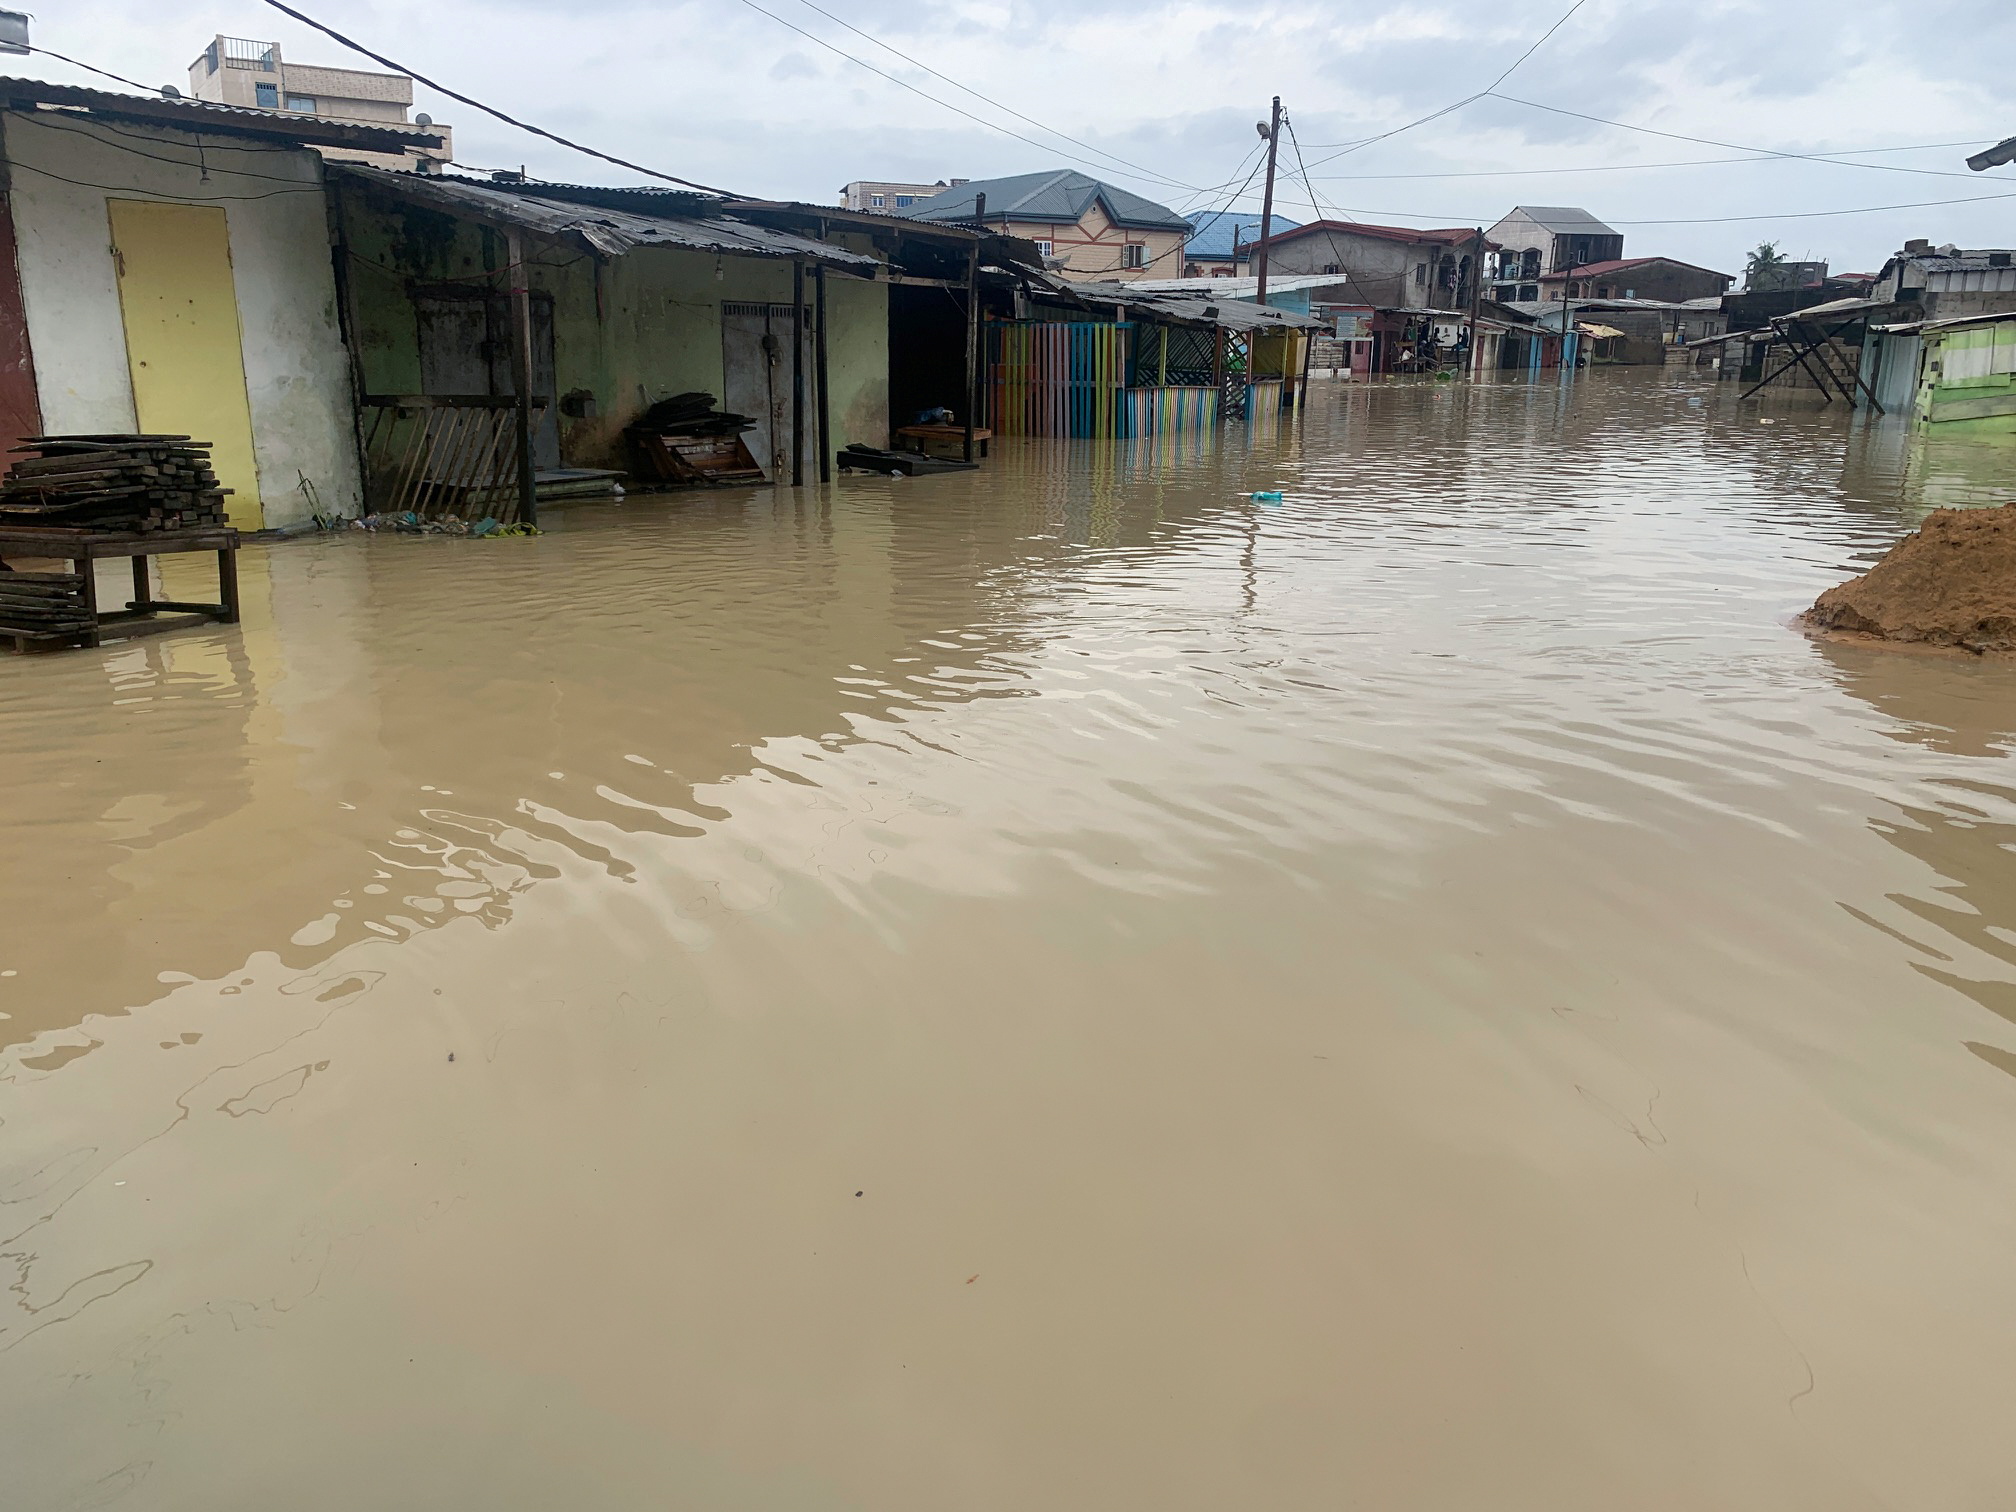 A view of a flooded area pictured after the heavy rains in Douala